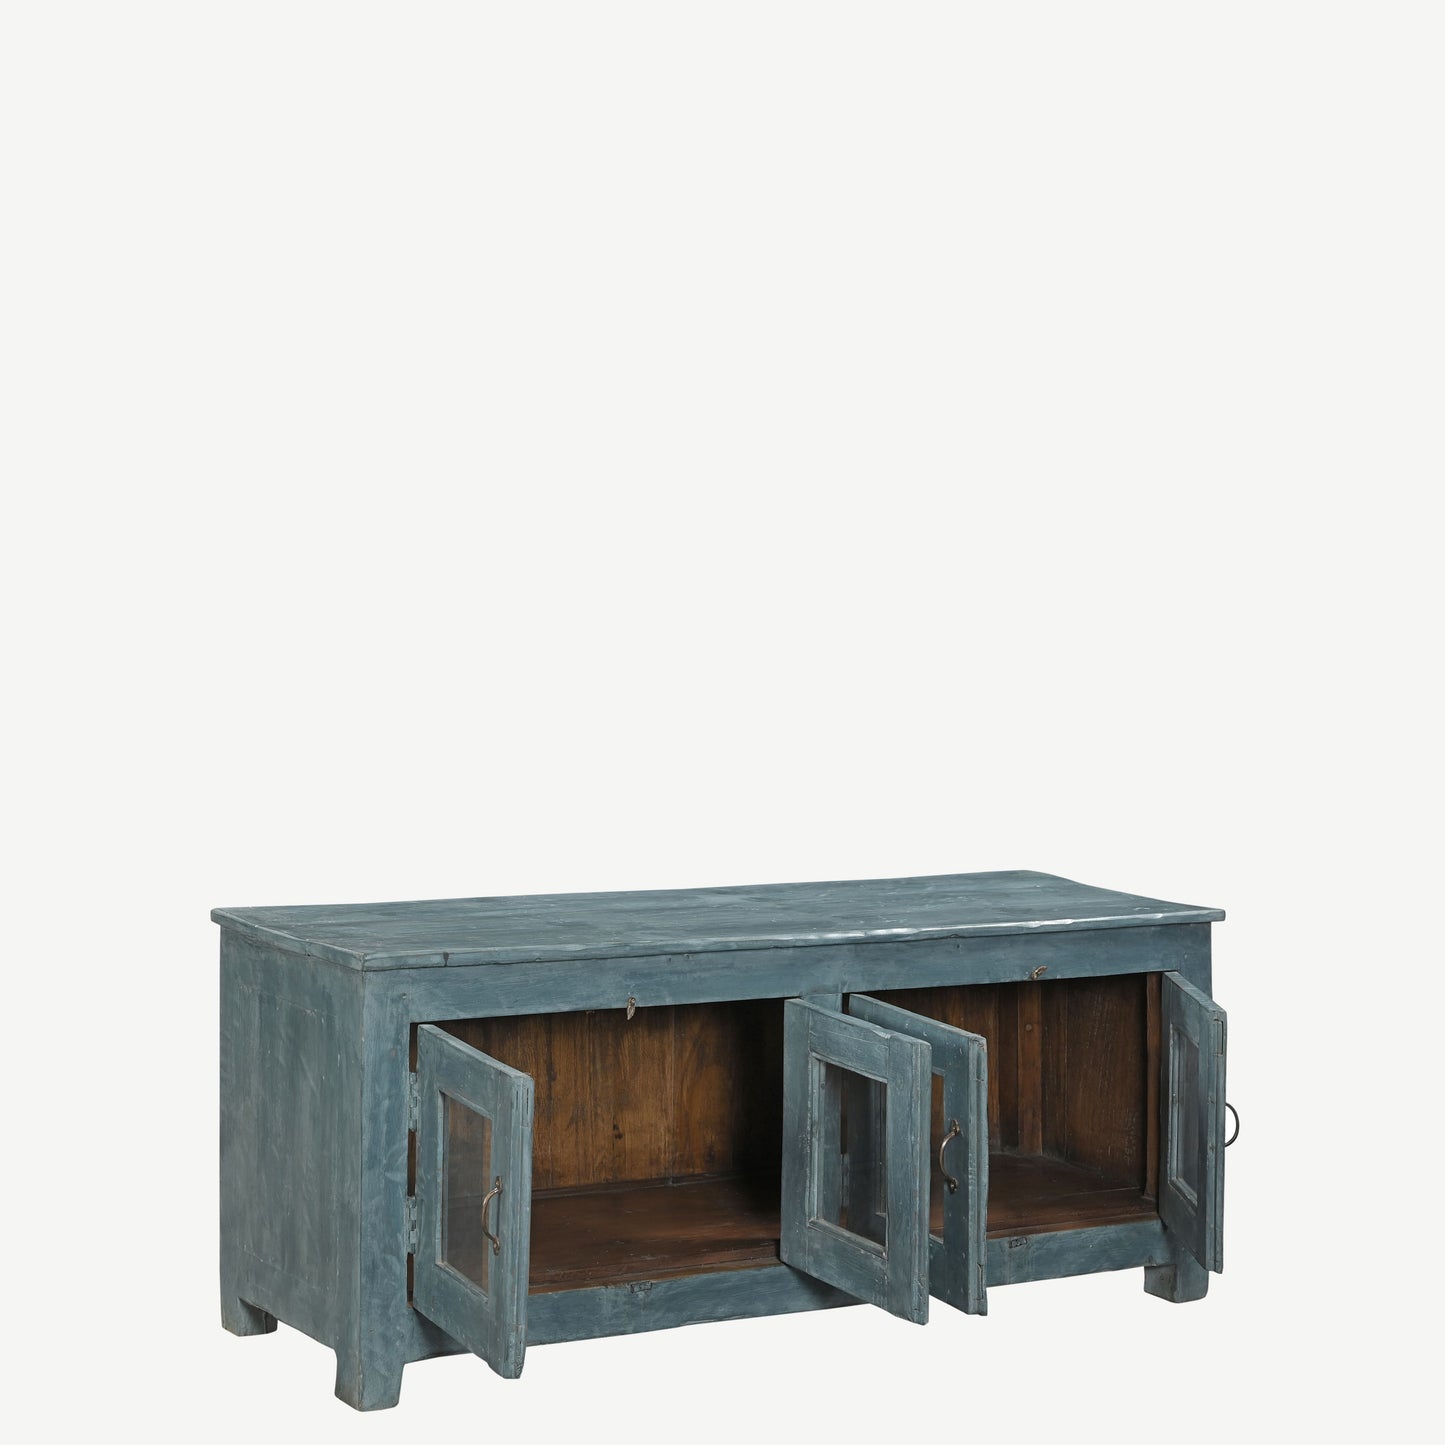 The Breen Antique Sideboard in Baltimore Blue